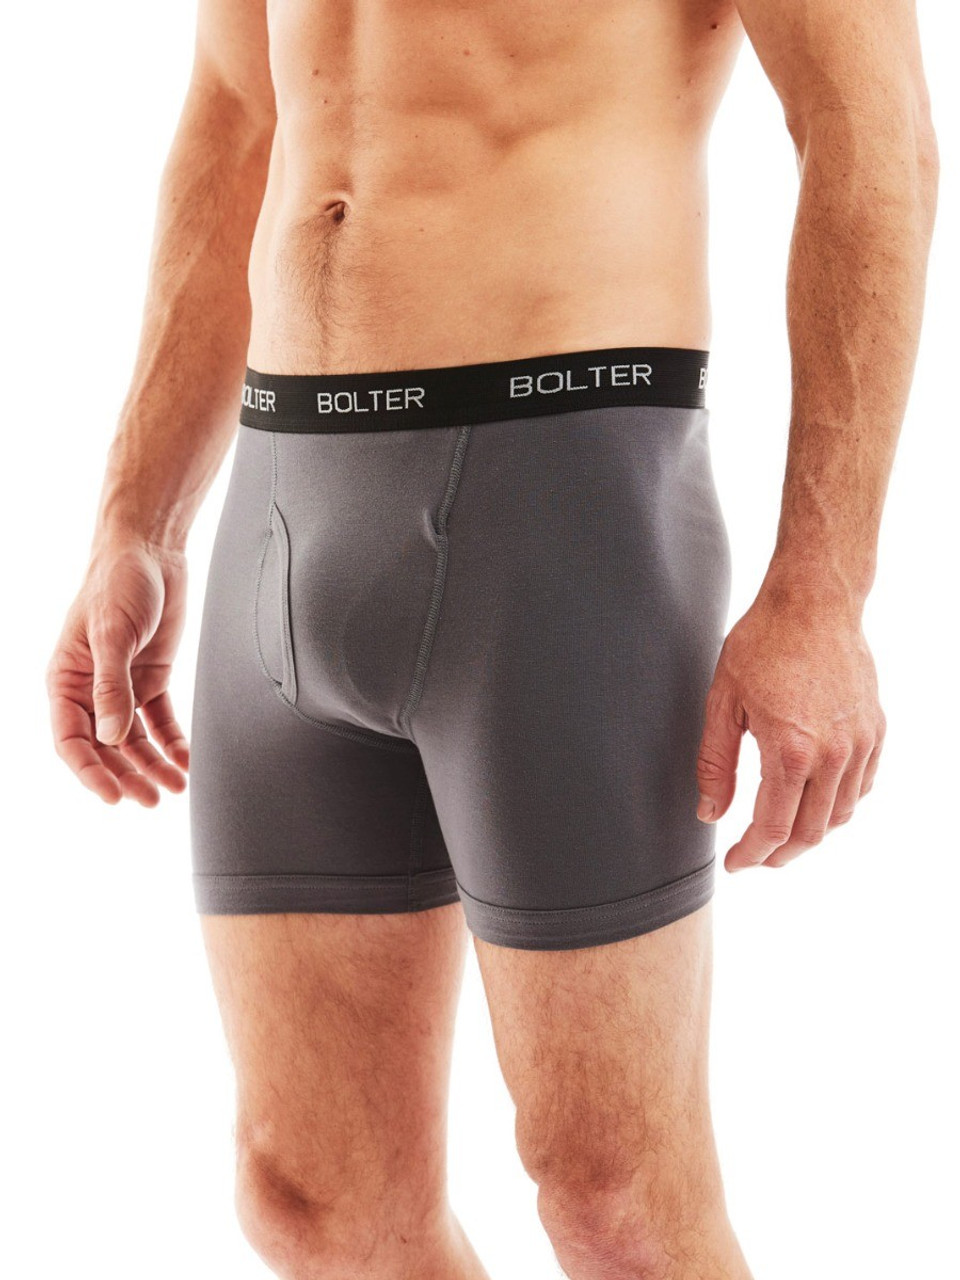 Mens Spandex Mens Leather Briefs Fashionable, Thin, And Breathable